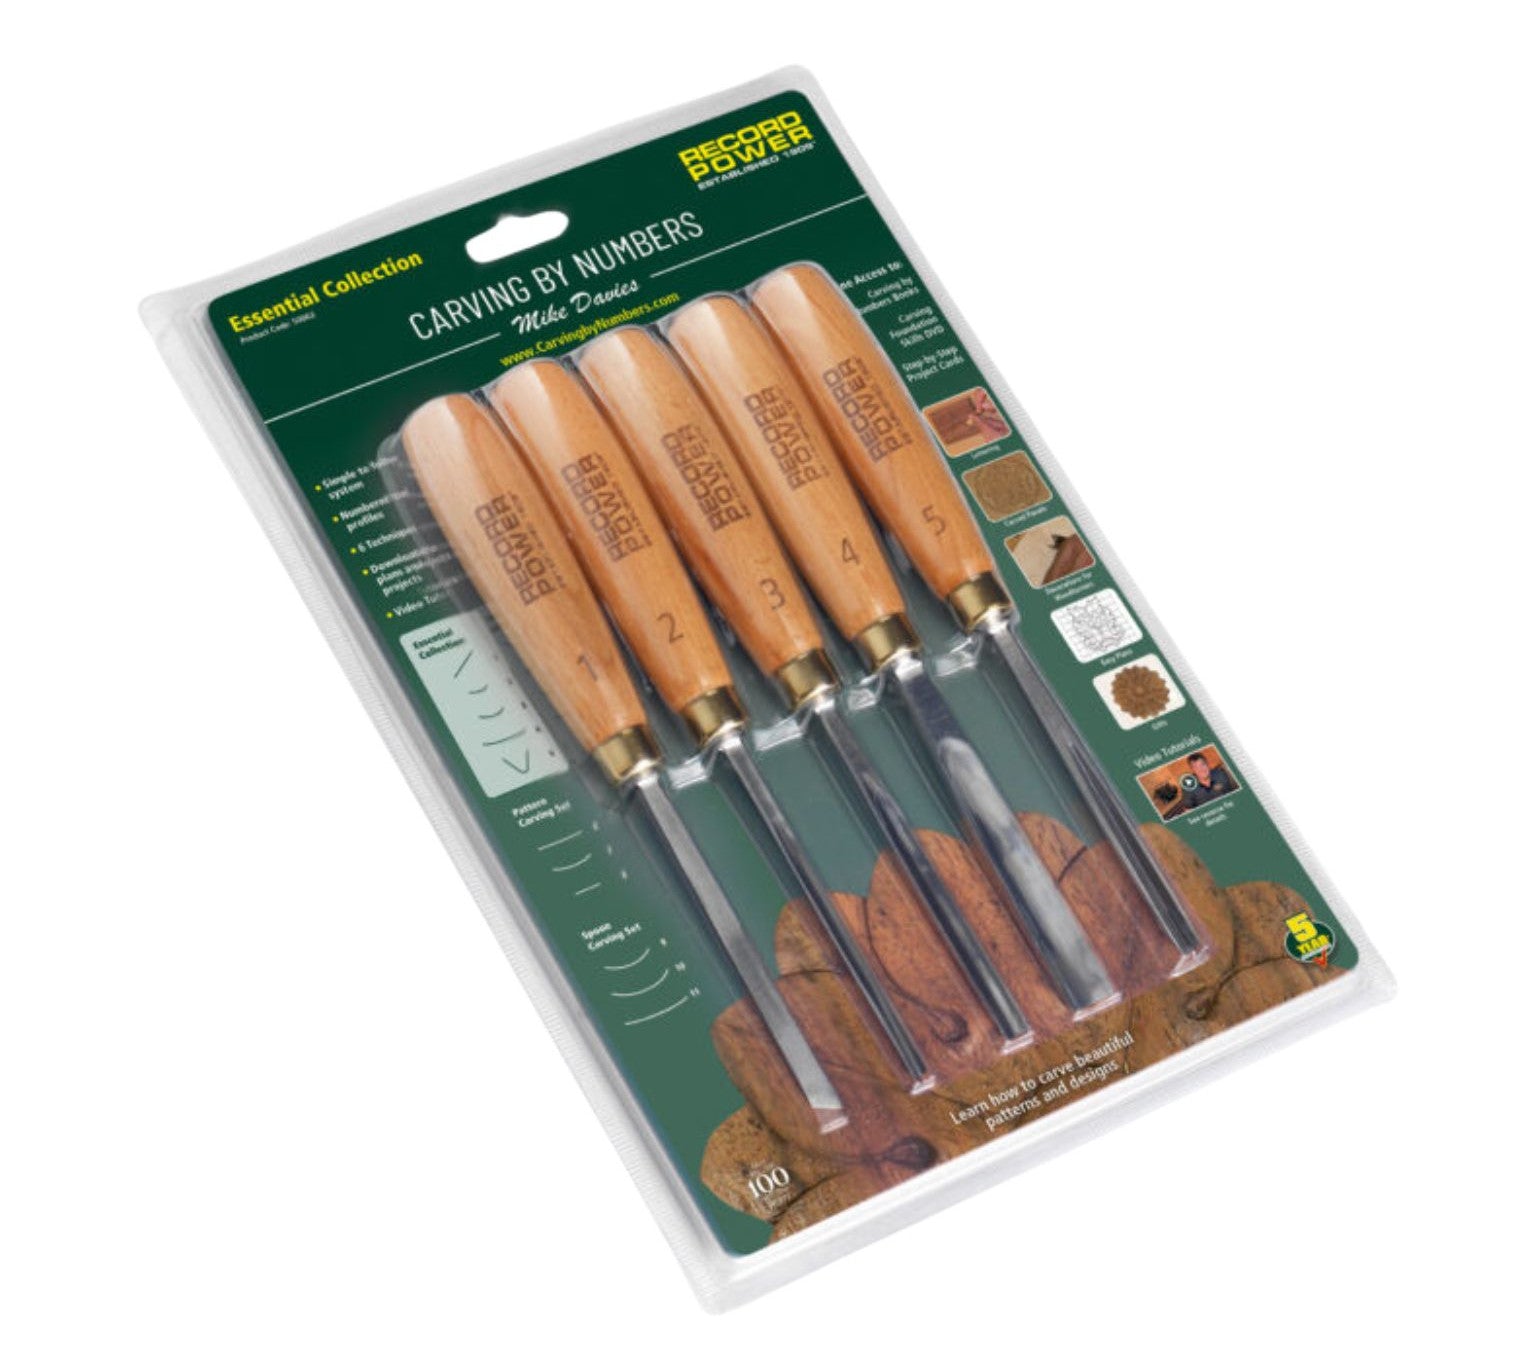 Carving by numbers Record Power Essential Carving tools collection